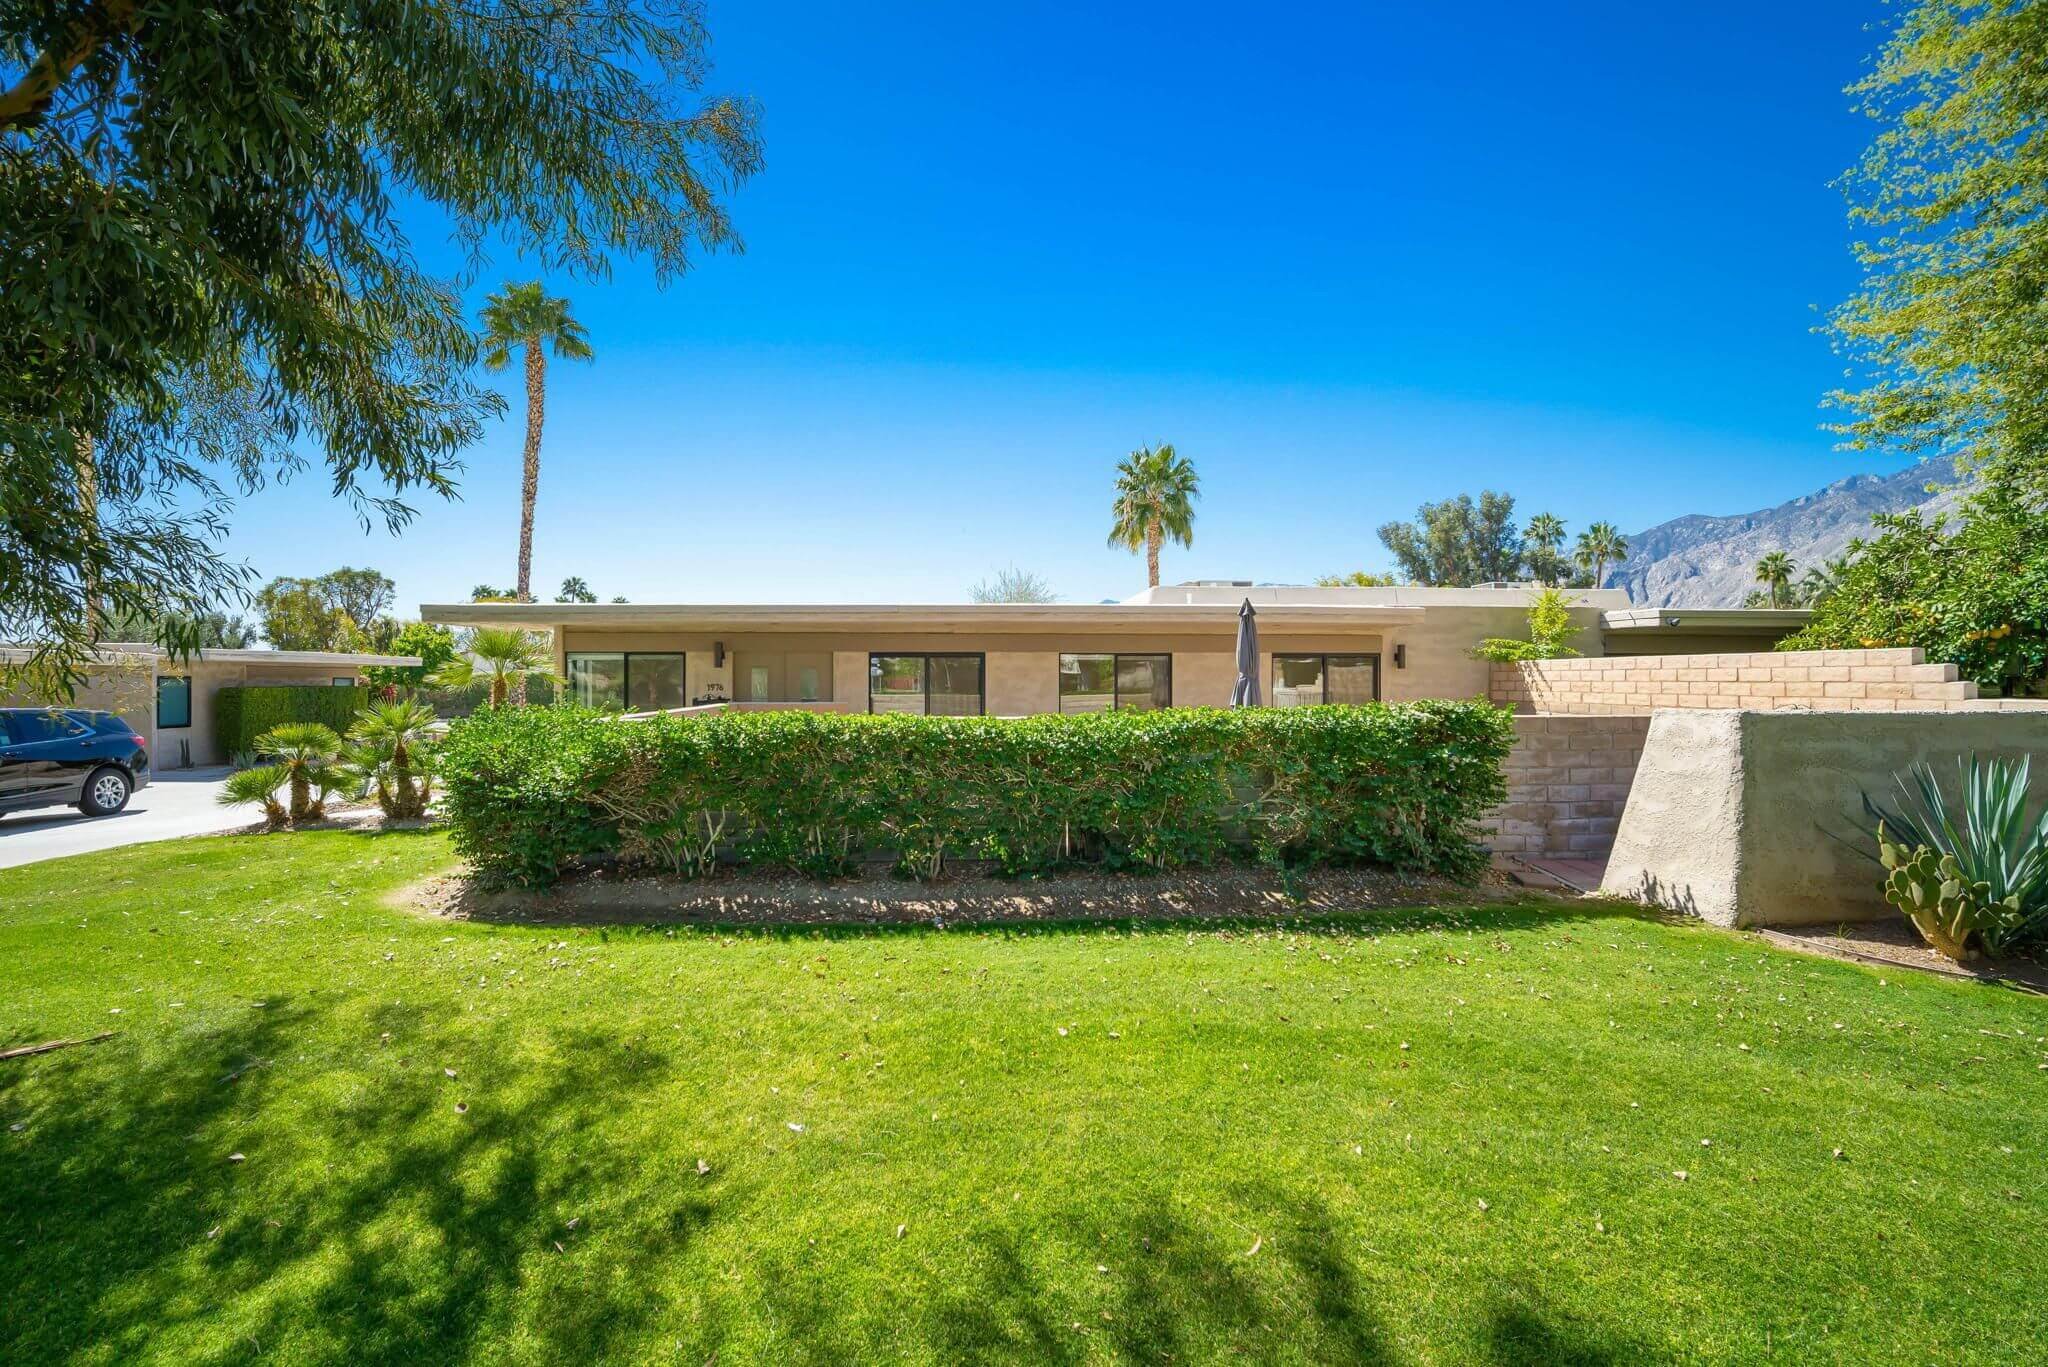 Sagewood Palm Springs Homes For Sale